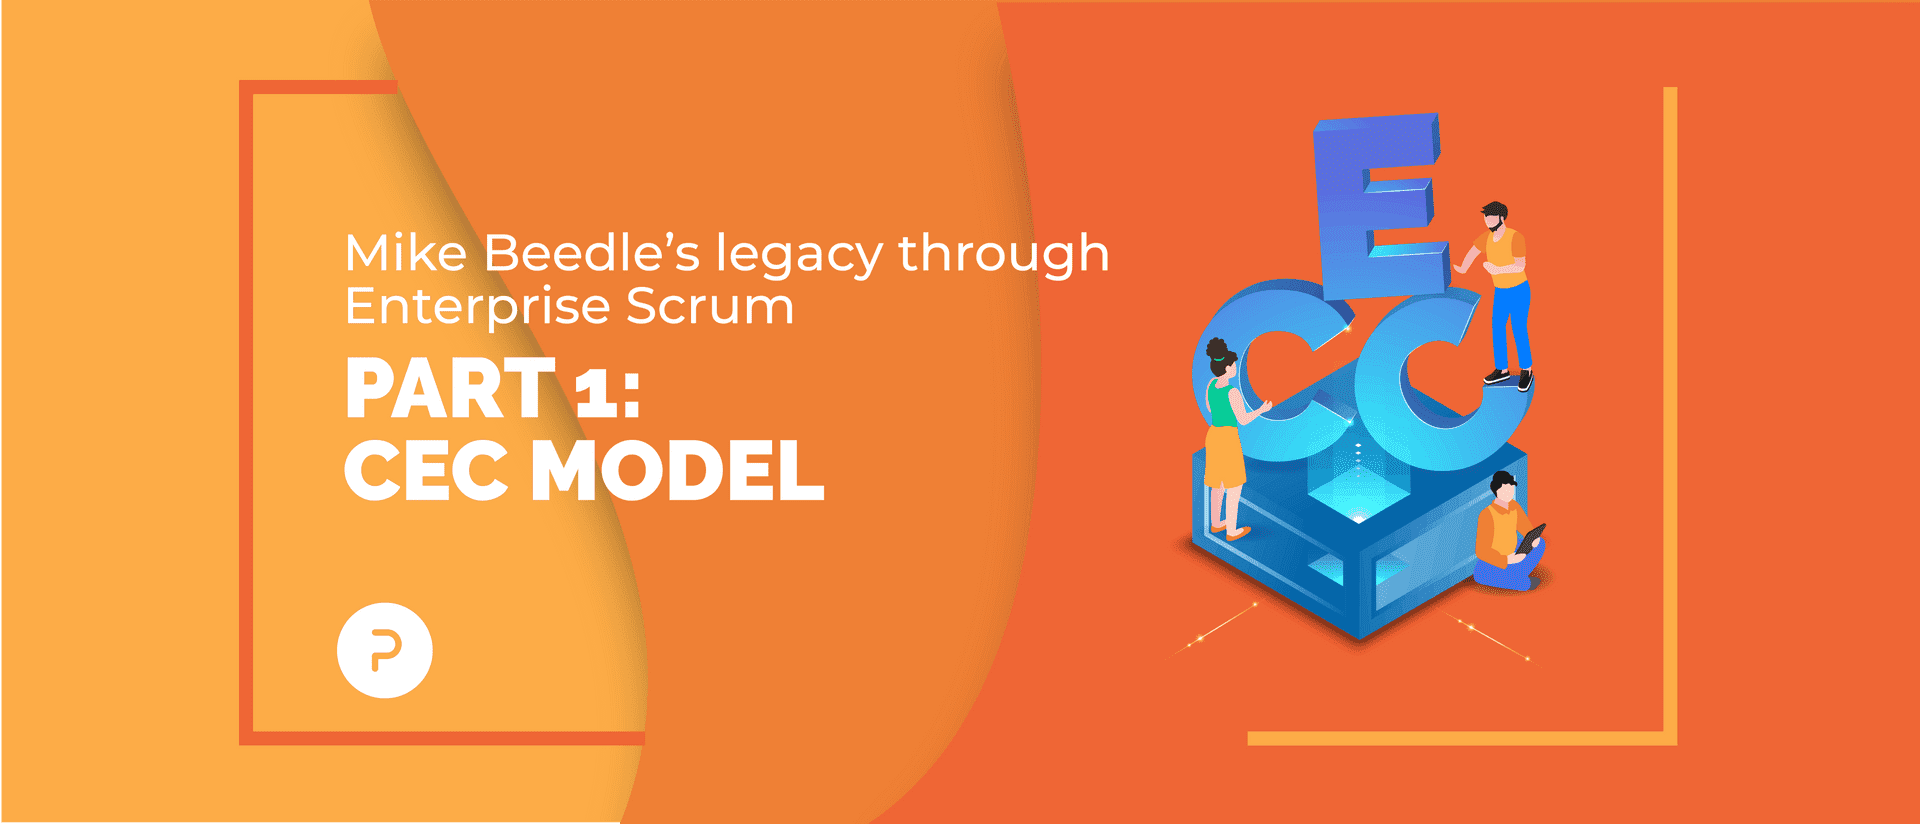 Mike Beedle’s Legacy Through the CEC Model from Enterprise Scrum